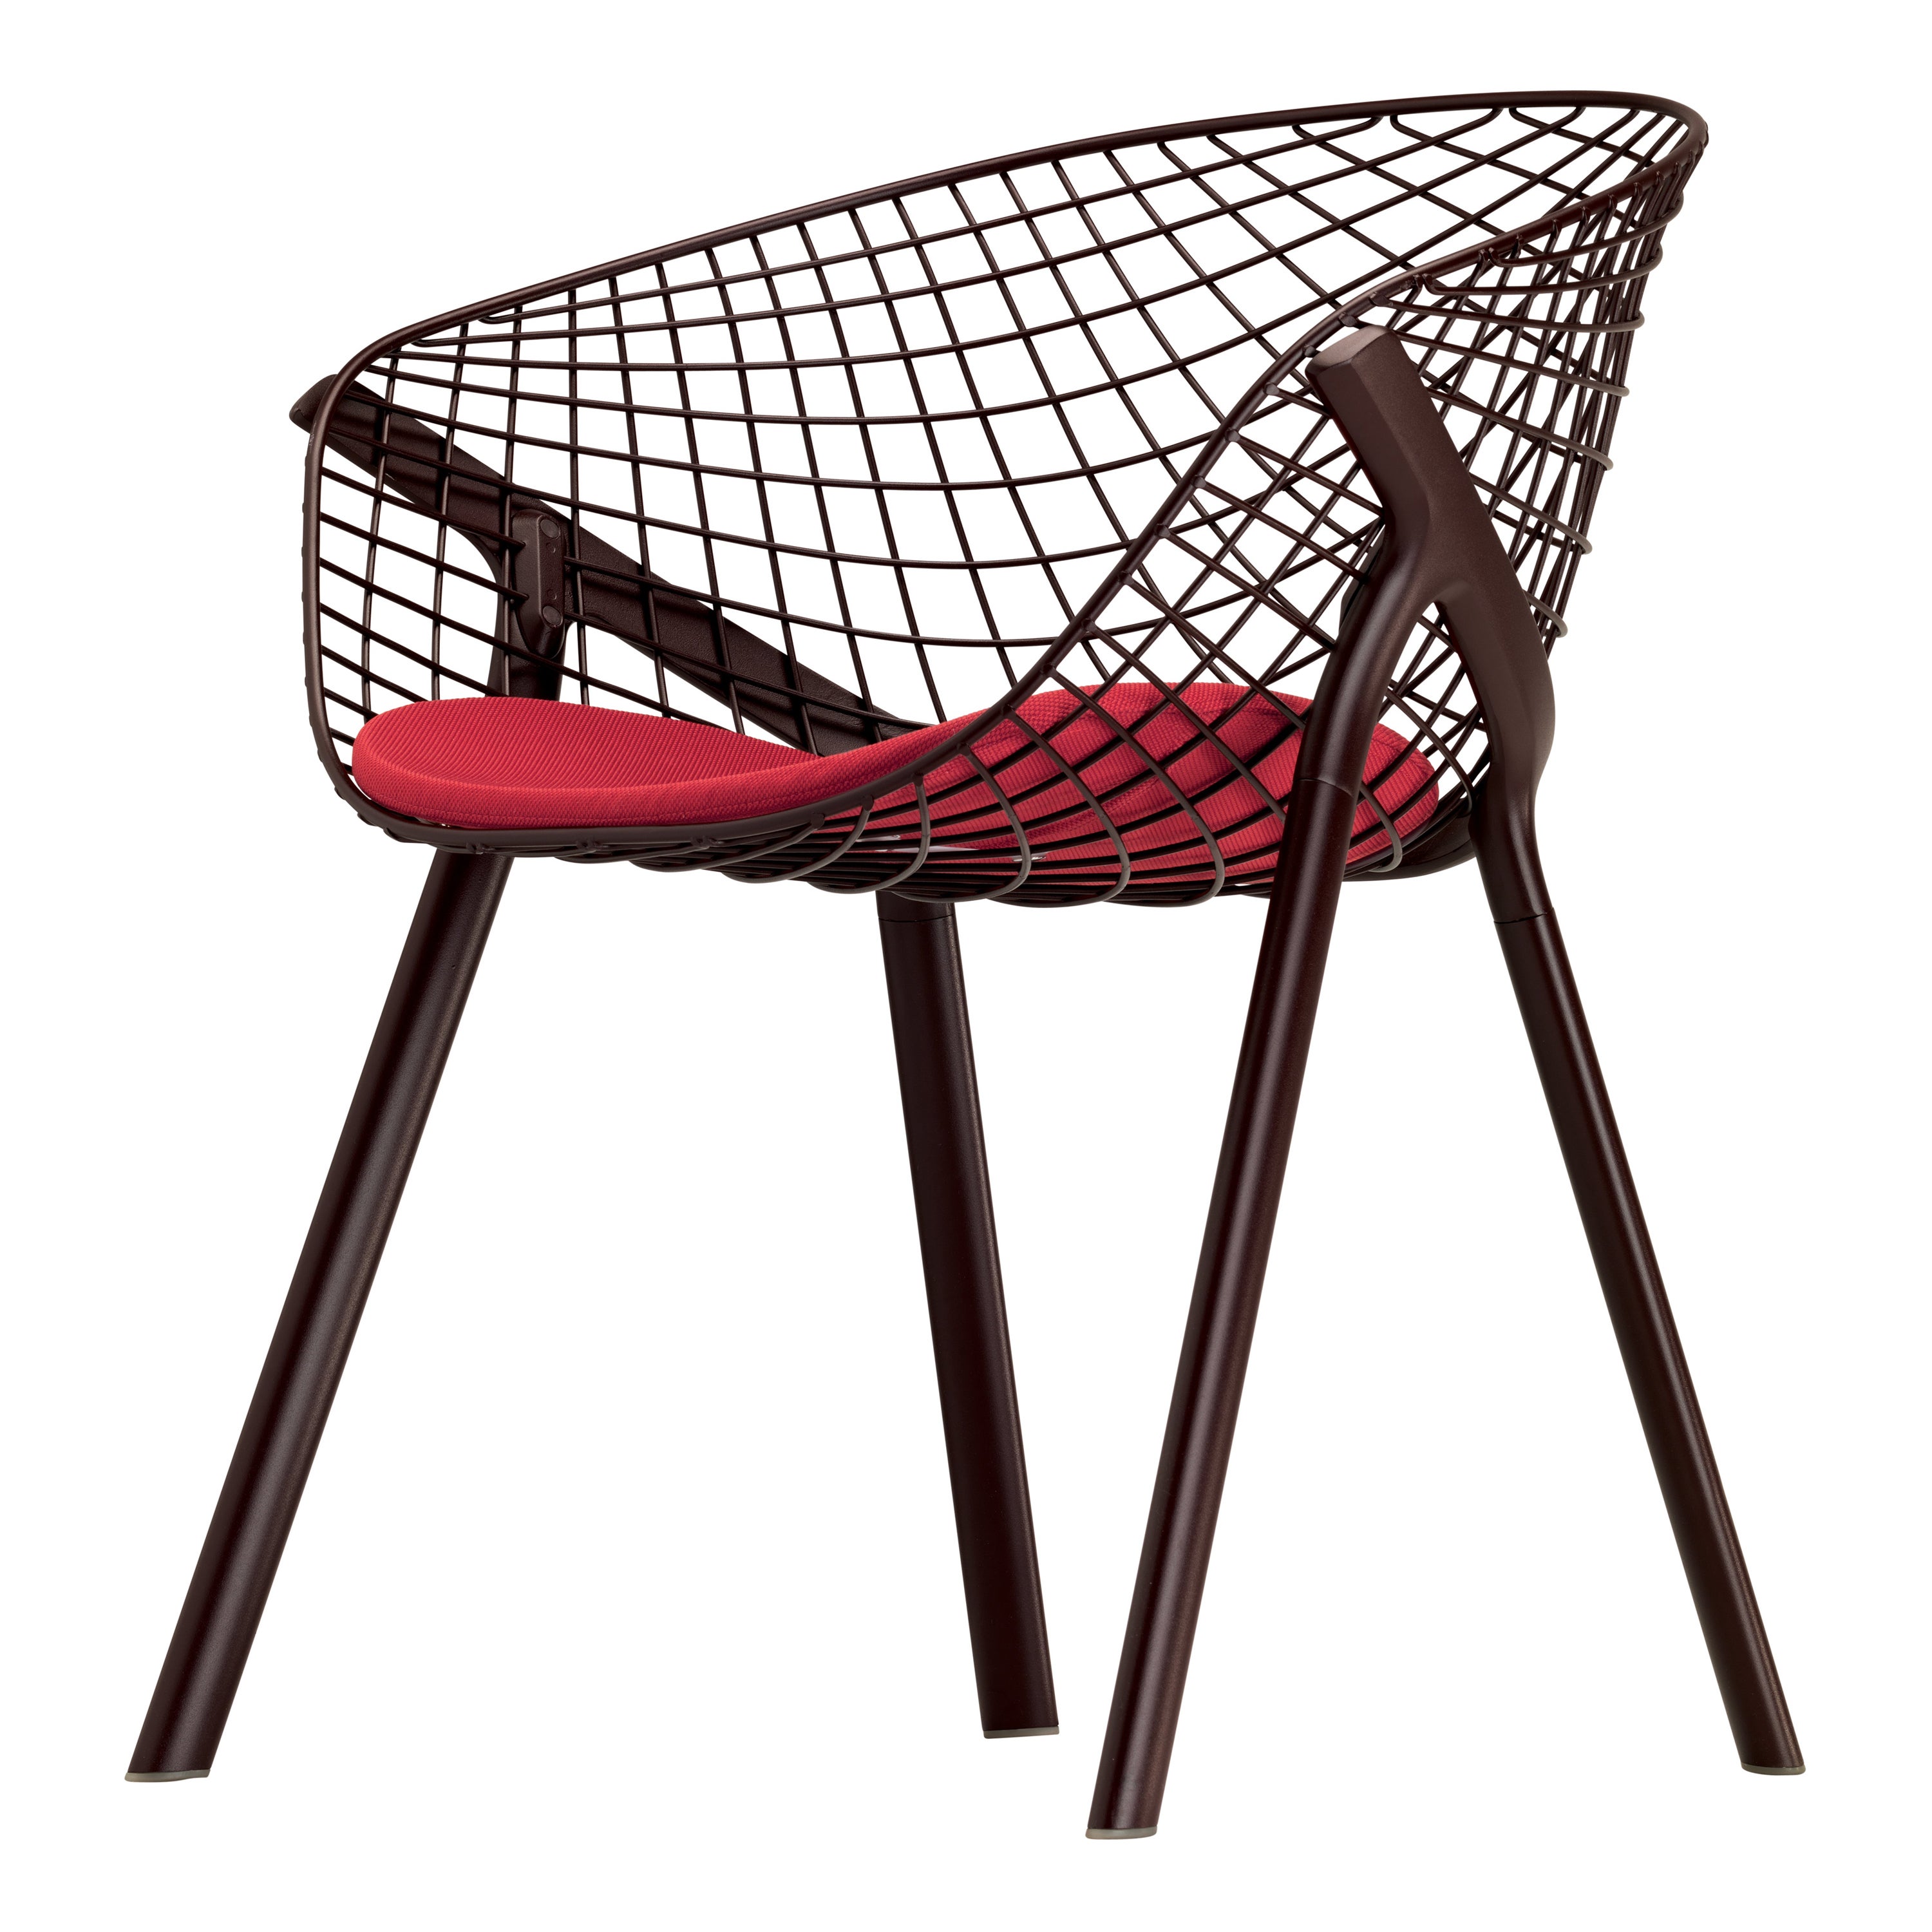 Alias 040 Kobi Chair w/ Small Pad in Red and Aubergine Lacquered Aluminum Frame